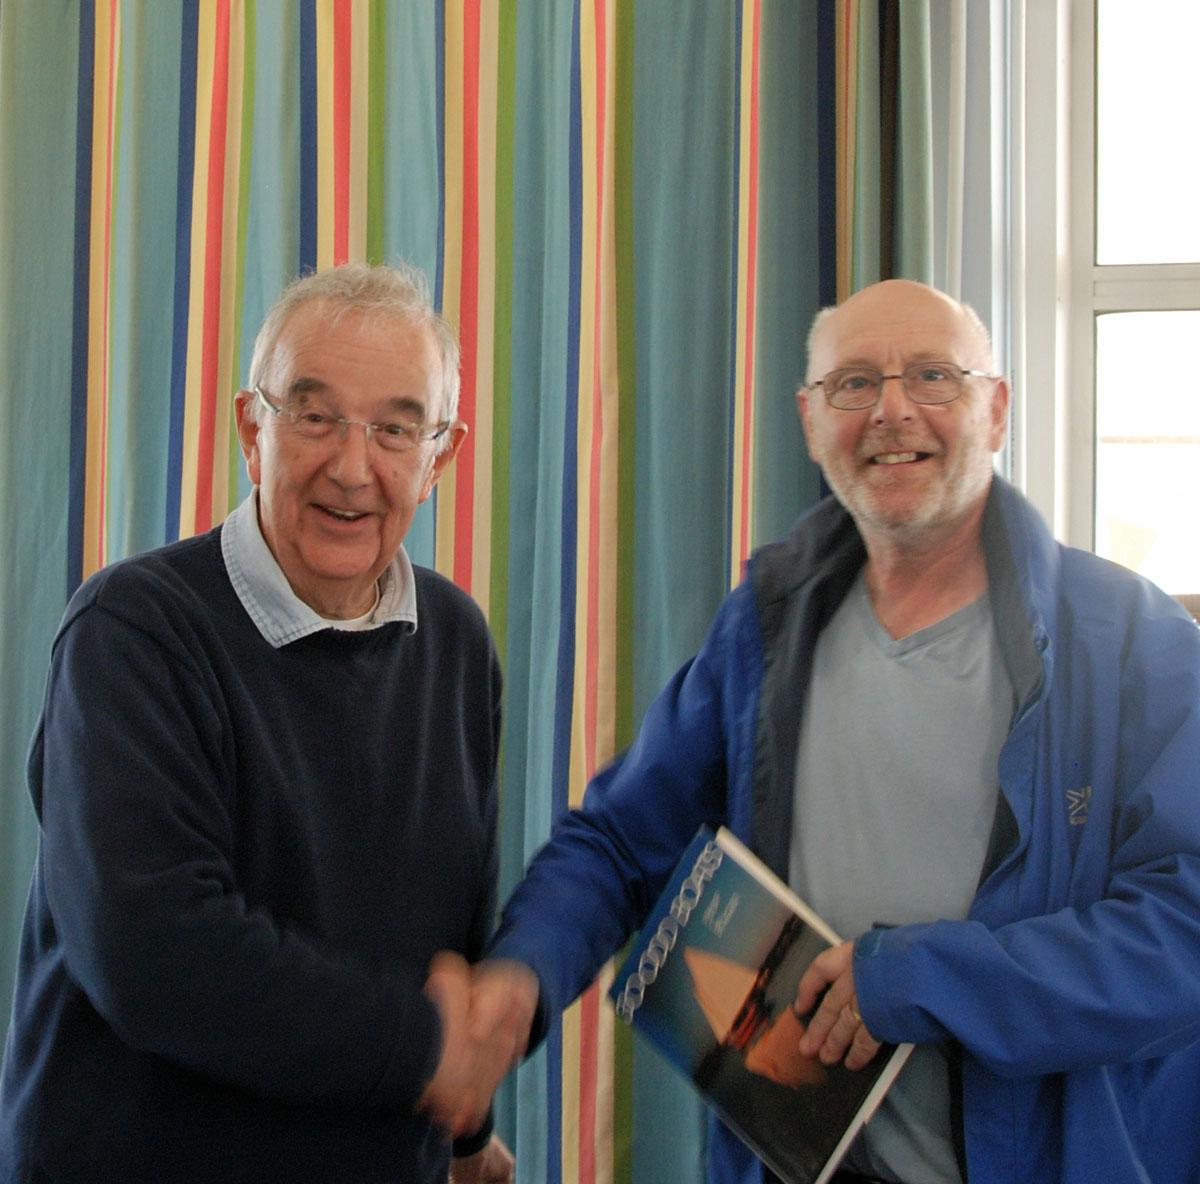 Peter Mitchell on the left and Peter Shepherd receiving his prize